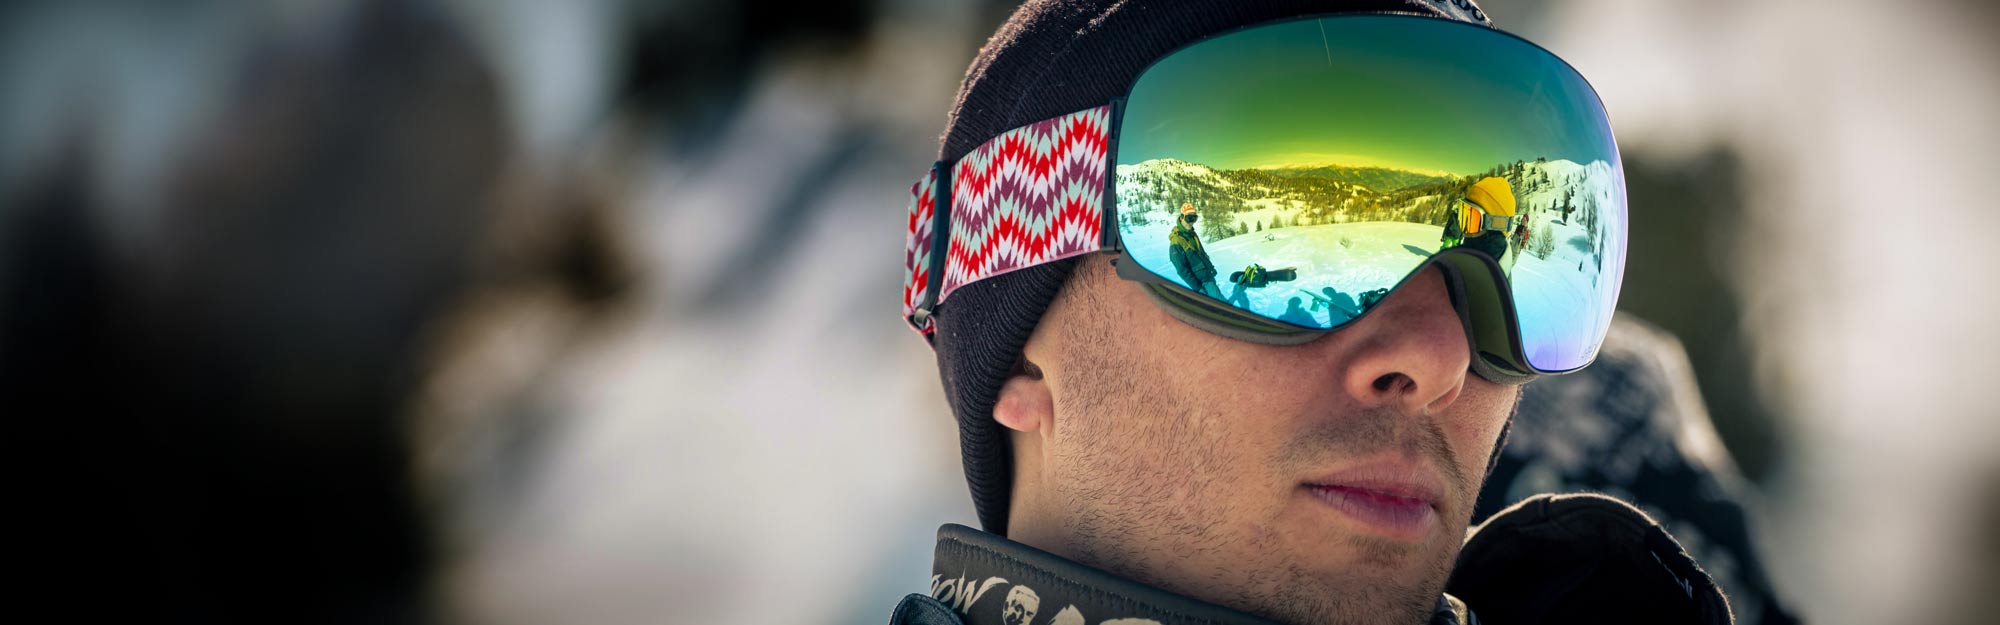 XPR Snow Goggles